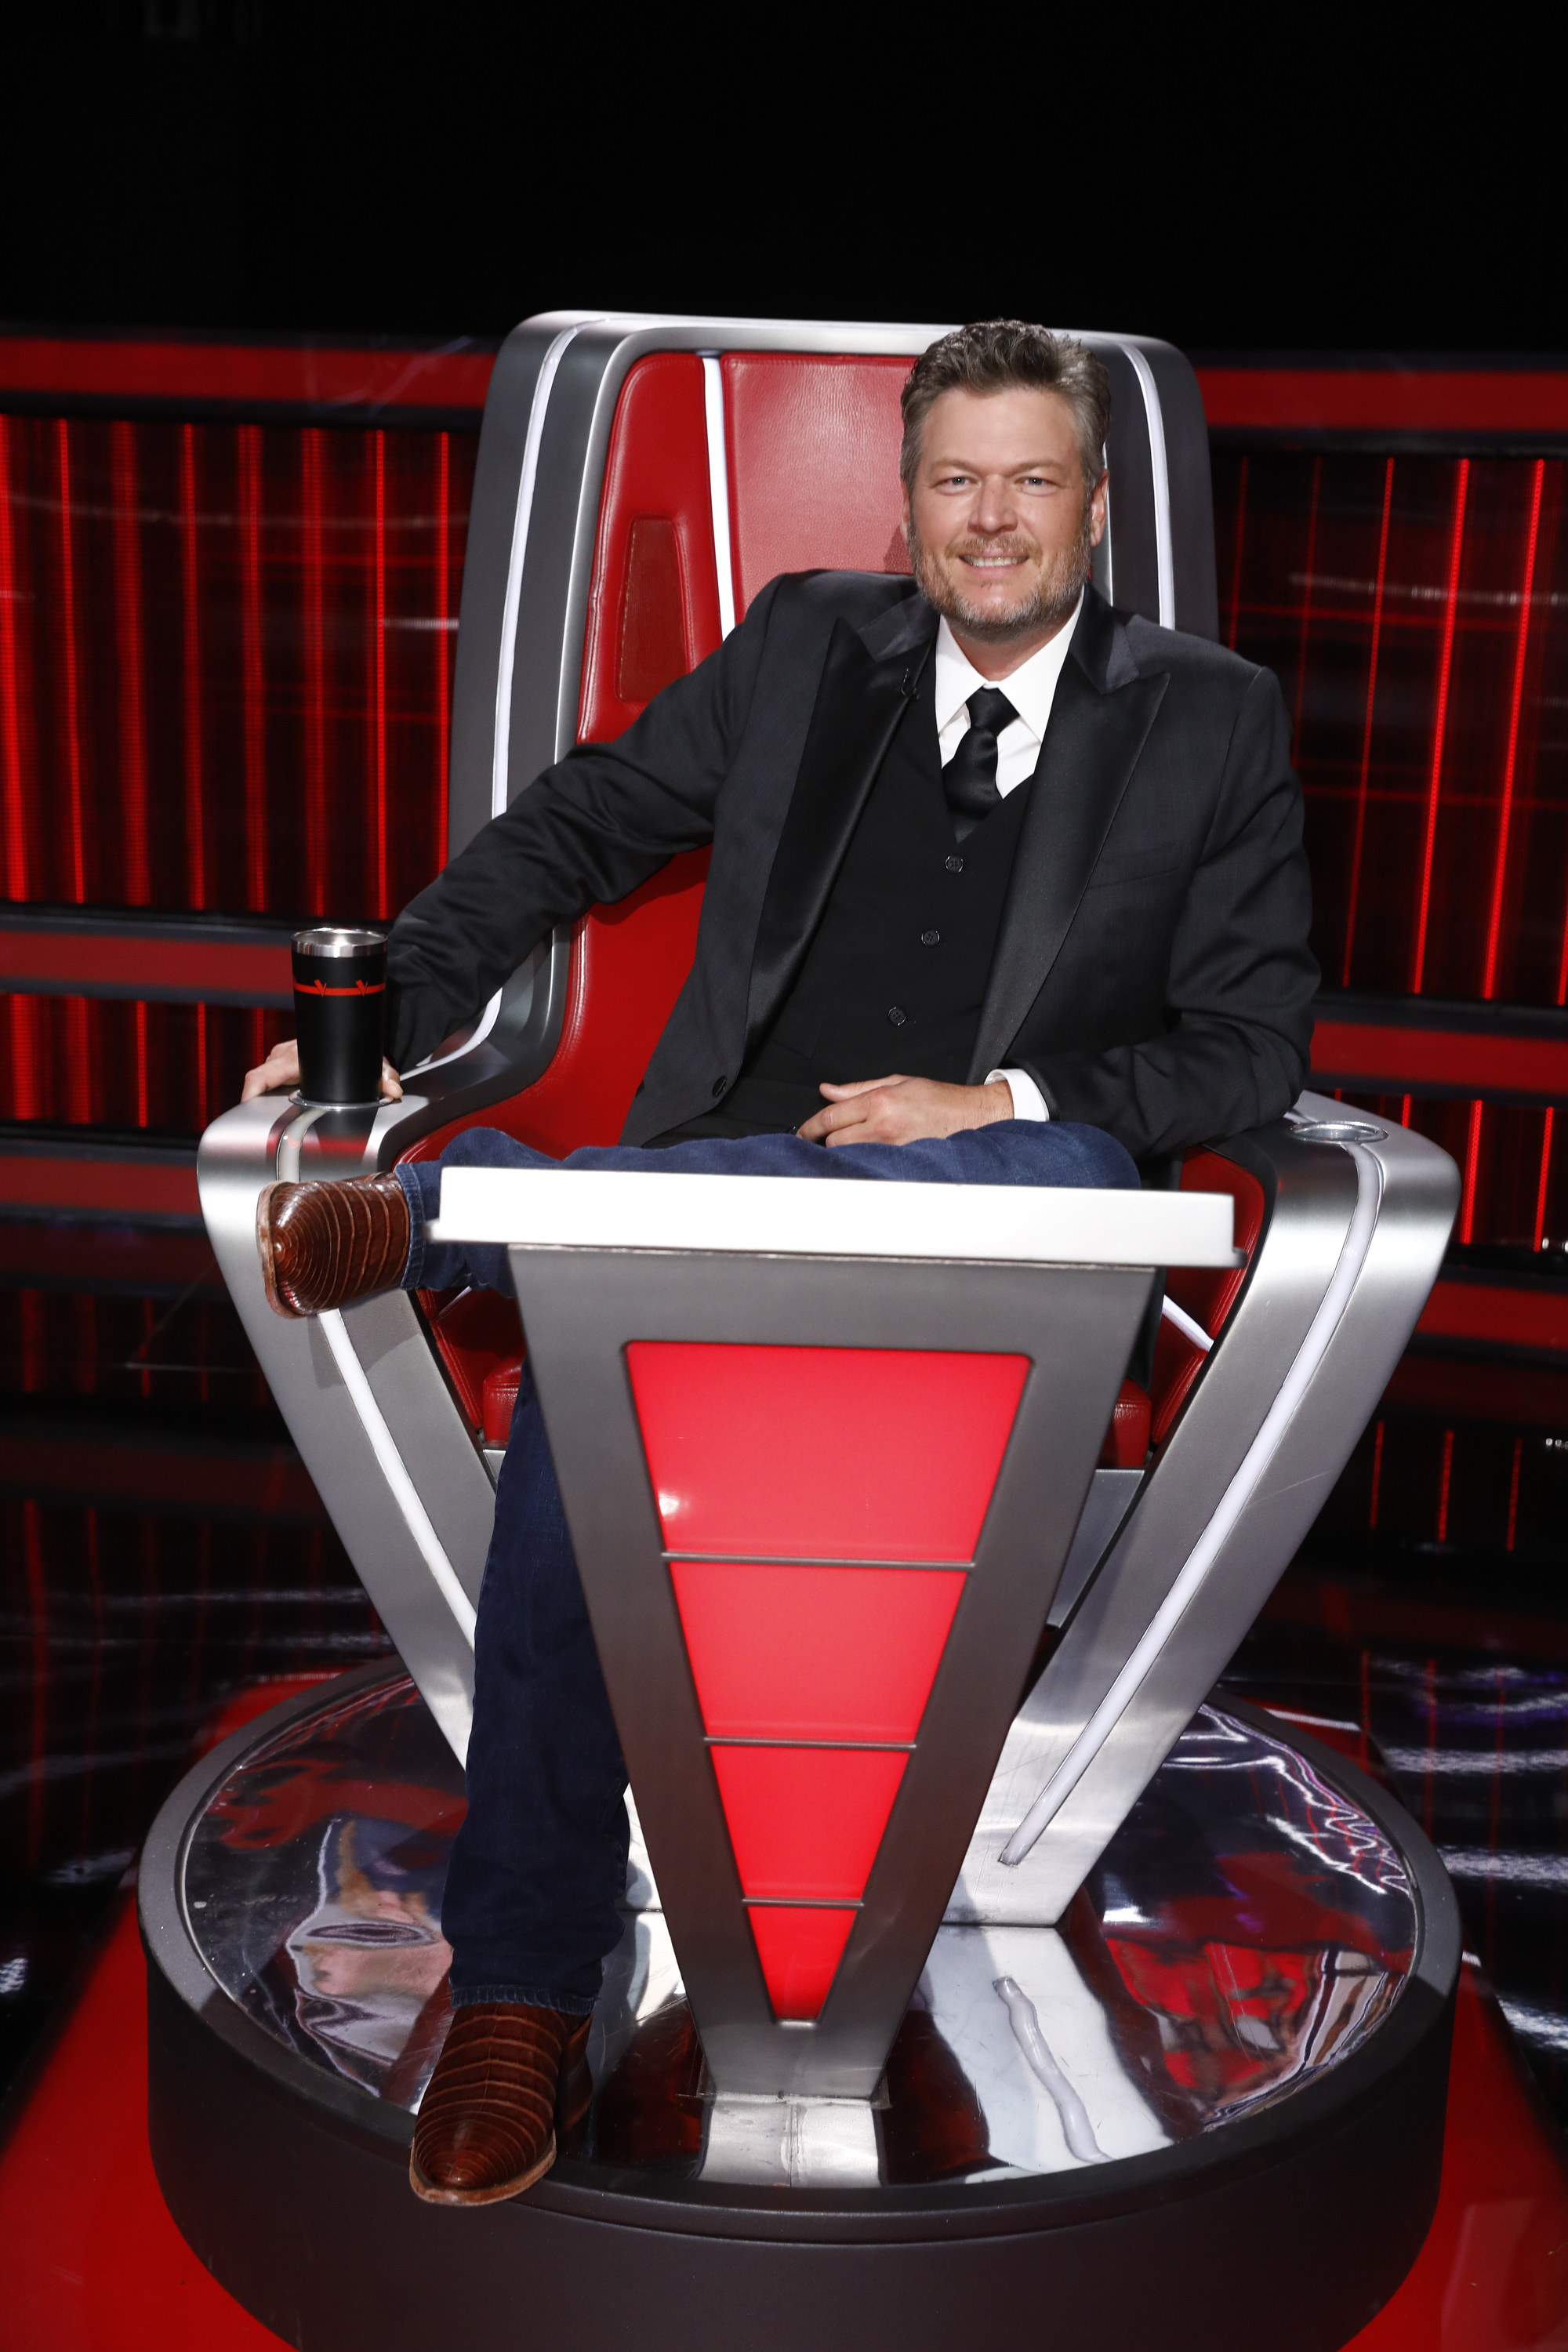 Blake Shelton poses in his judge&#x27;s chair on set of &quot;The Voice&quot;